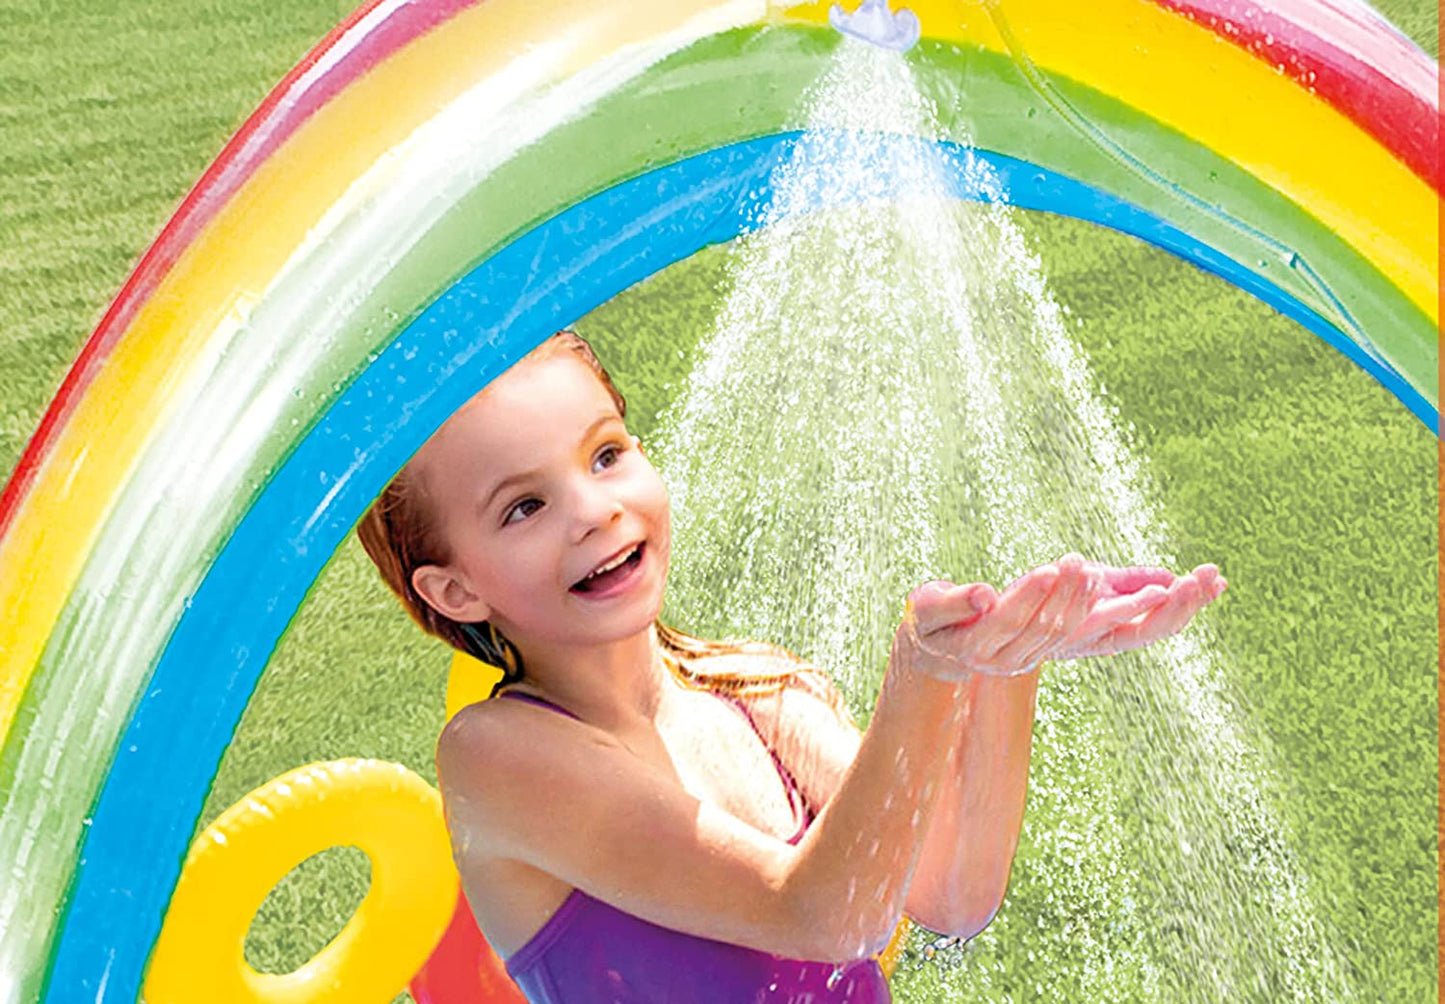 ntex Multicolored Inflatable Rainbow Ring Water Play Centre with Slide for Kids aged 2+ | 200ltr Water Capacity